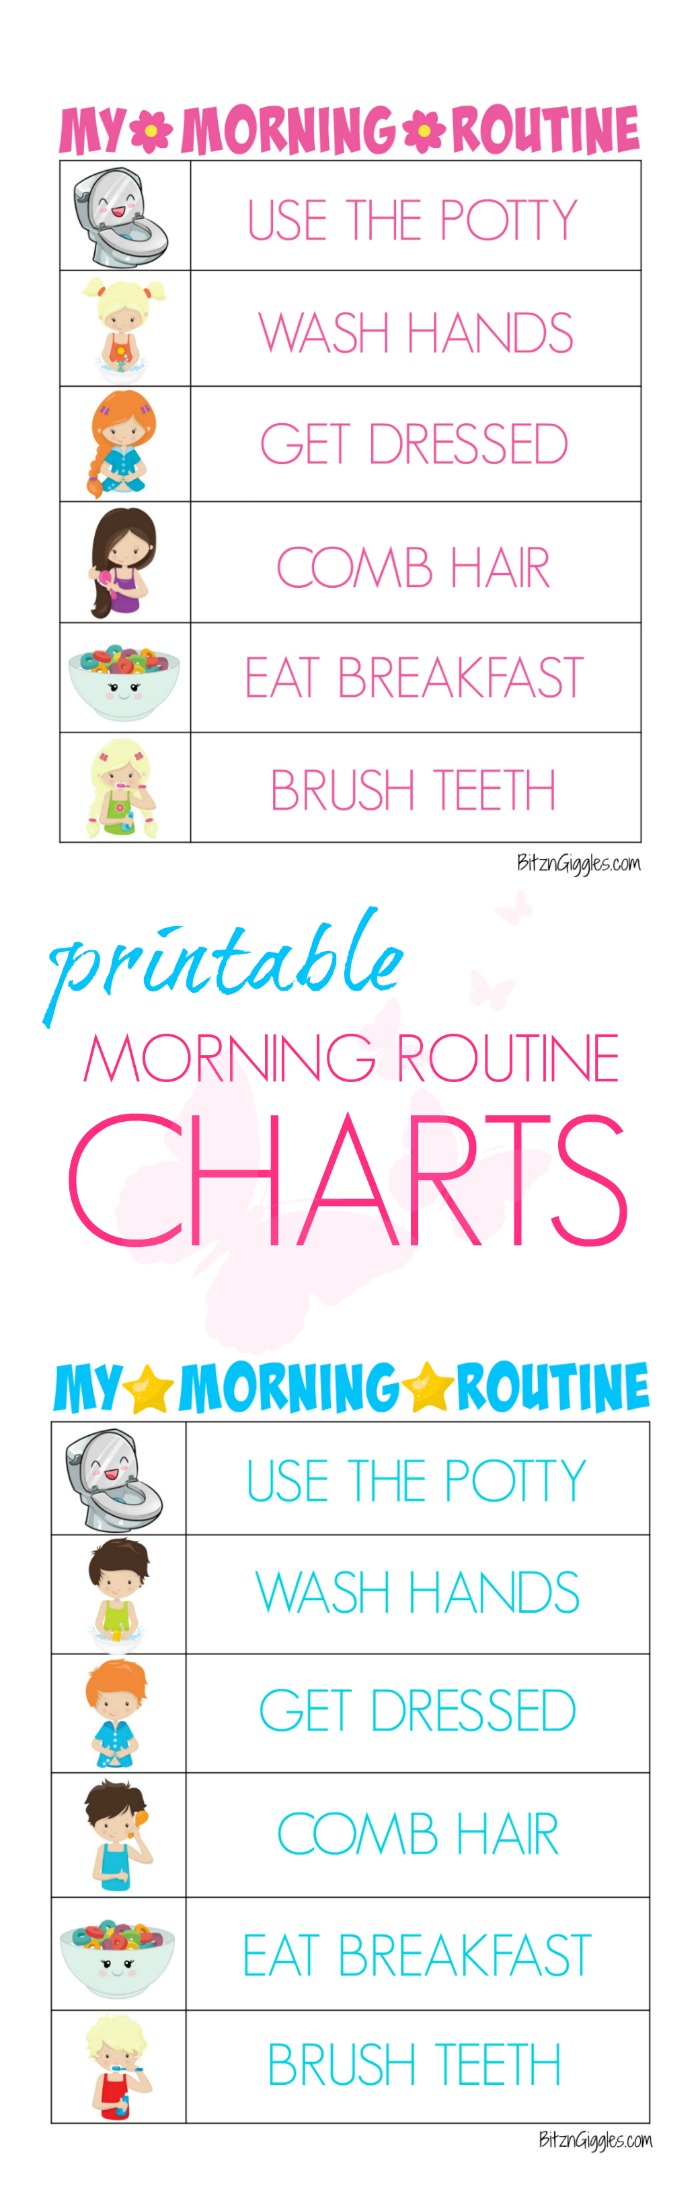 Printable Morning Routine Charts - Free printable kids morning routine charts to help teach kids independence and provide guidance for their morning routine! Charts for boys and girls!